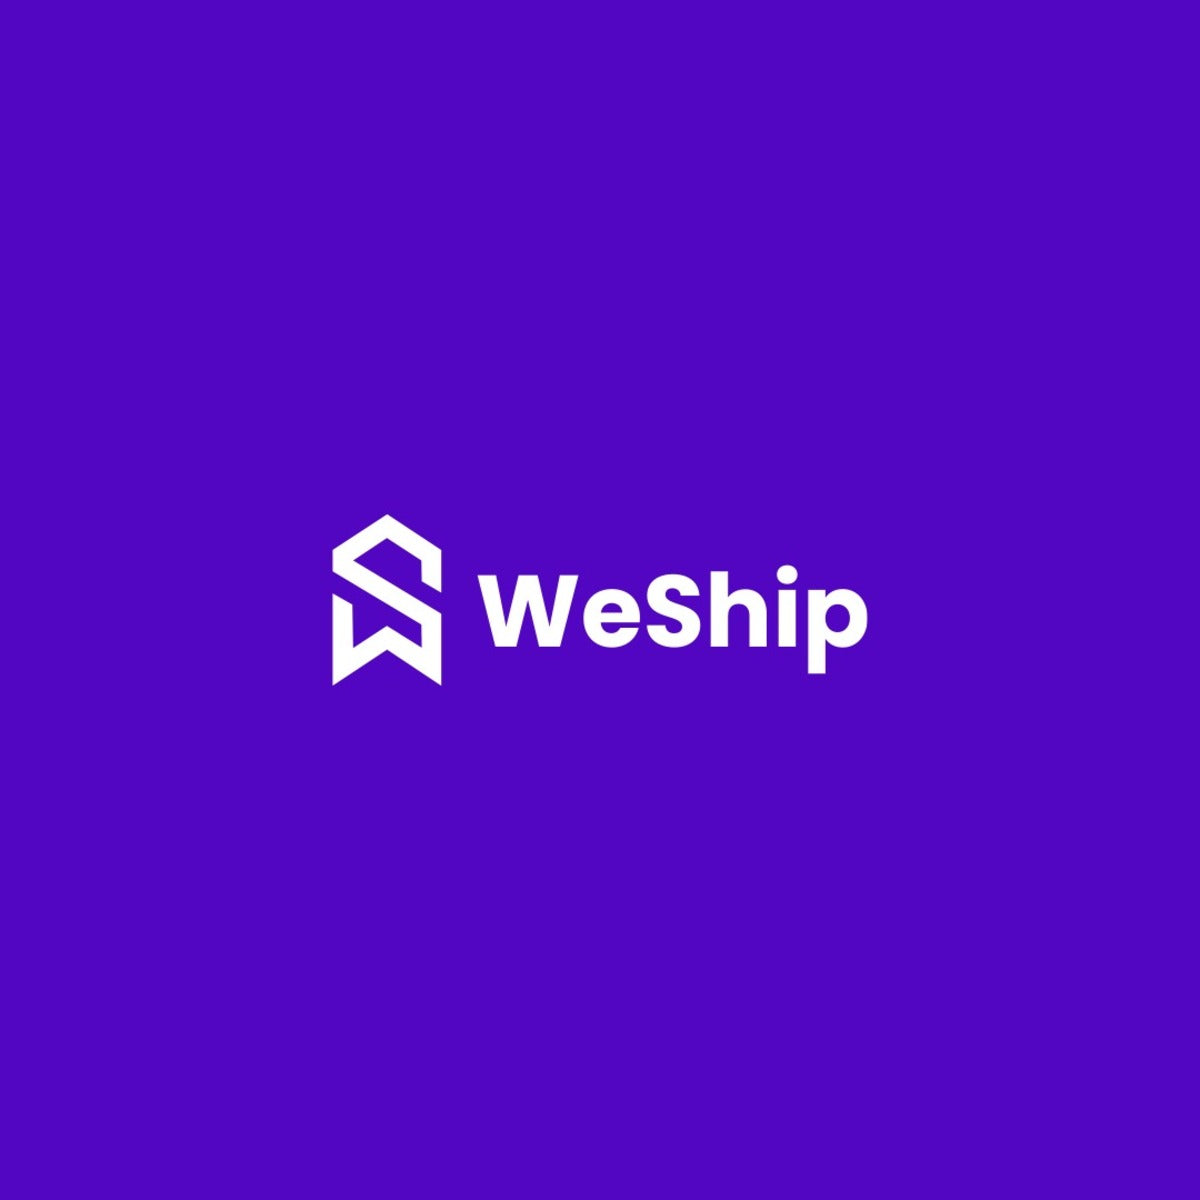 Hire Shopify Experts to integrate weship app into a Shopify store